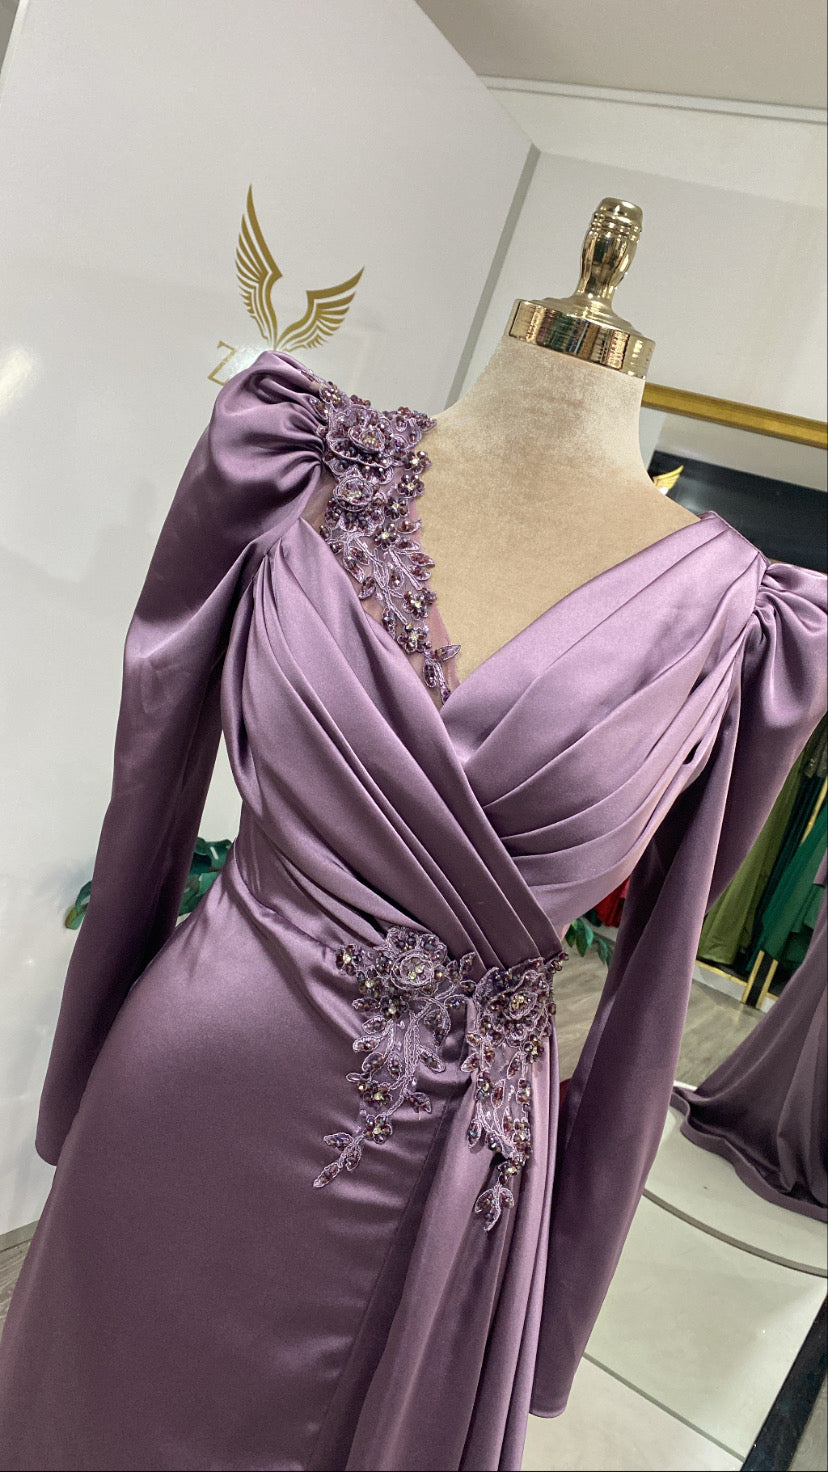 Purple dress detailed with pearls